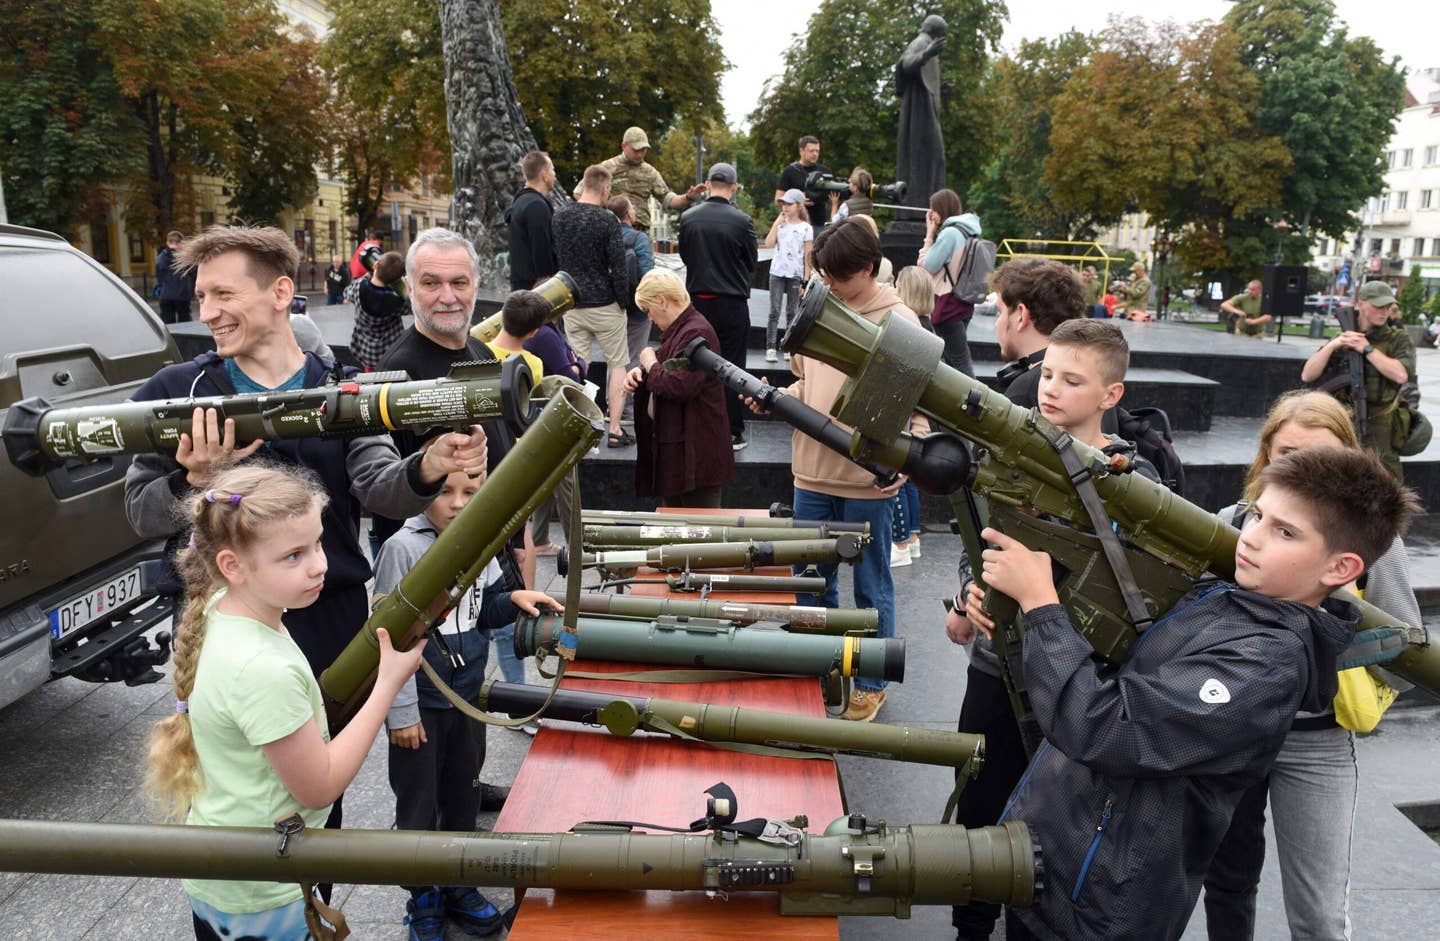 People hold used anti-tank and anti-aircraft military equipment such as Javelin, NLAW, Stinger and other, which were used by Ukrainian military in the fights with the Russian army, and are displayed in an outdoor exhibition in the western Ukrainian city of Lviv on Aug. 12. (Photo by Yuriy Dyachyshyn / AFP) (Photo by YURIY DYACHYSHYN/AFP via Getty Images)